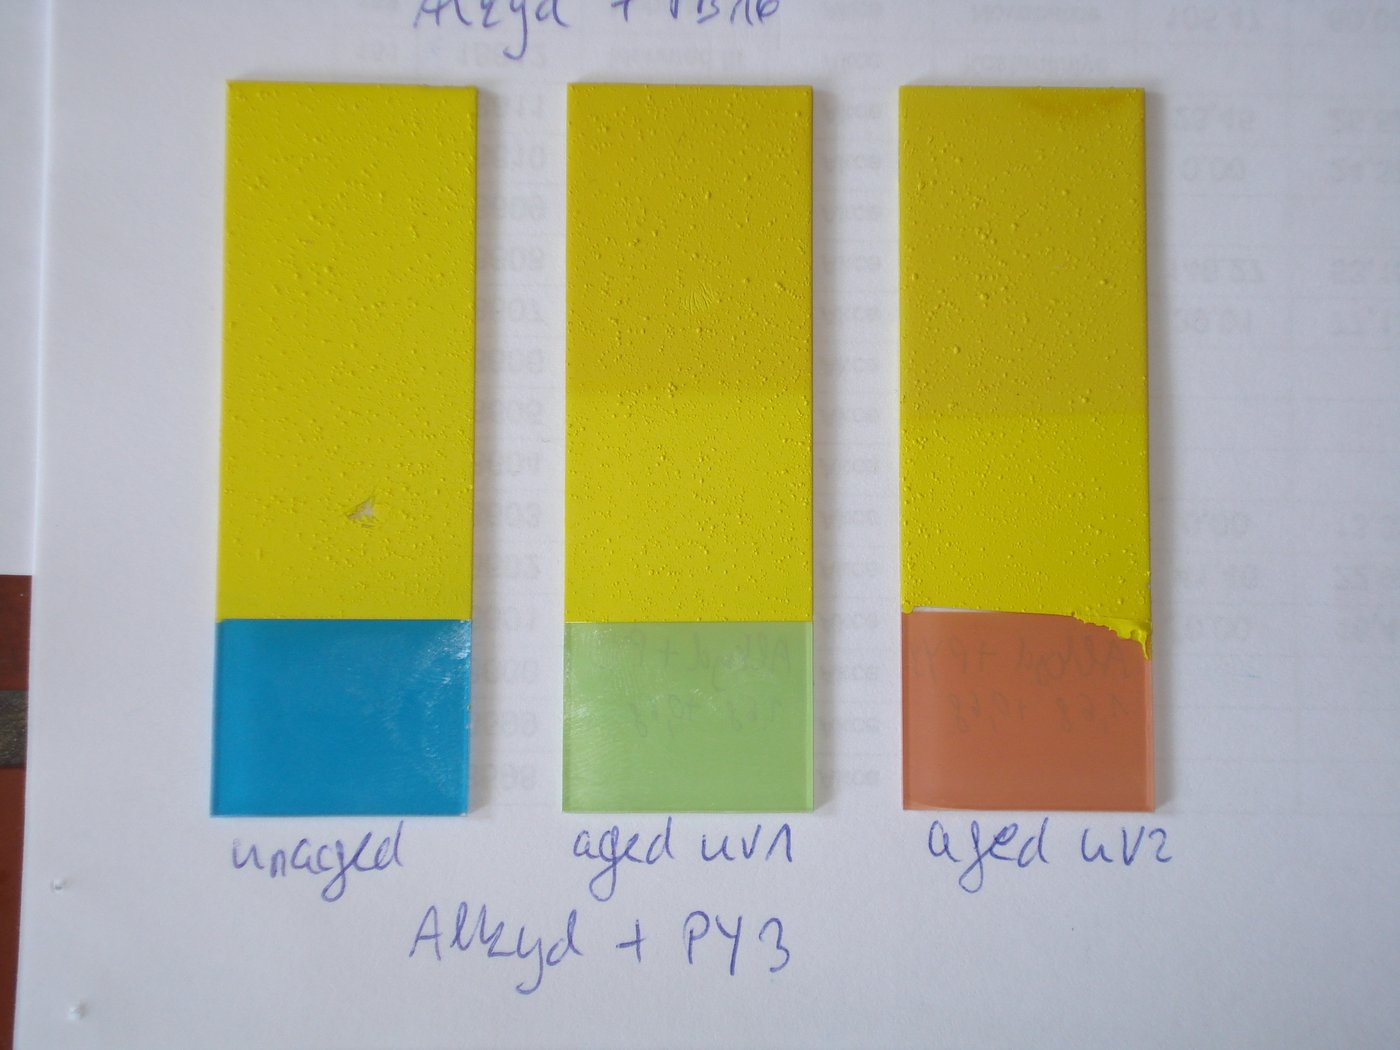 Three elongated glass plates coated with yellow paint on a sheet of paper, labelling underneath: under the left one it says "unaged", under the middle one it says "aged UV1" and under the third one it says "aged UV2". Under all three is written: Alkyd + PY3.